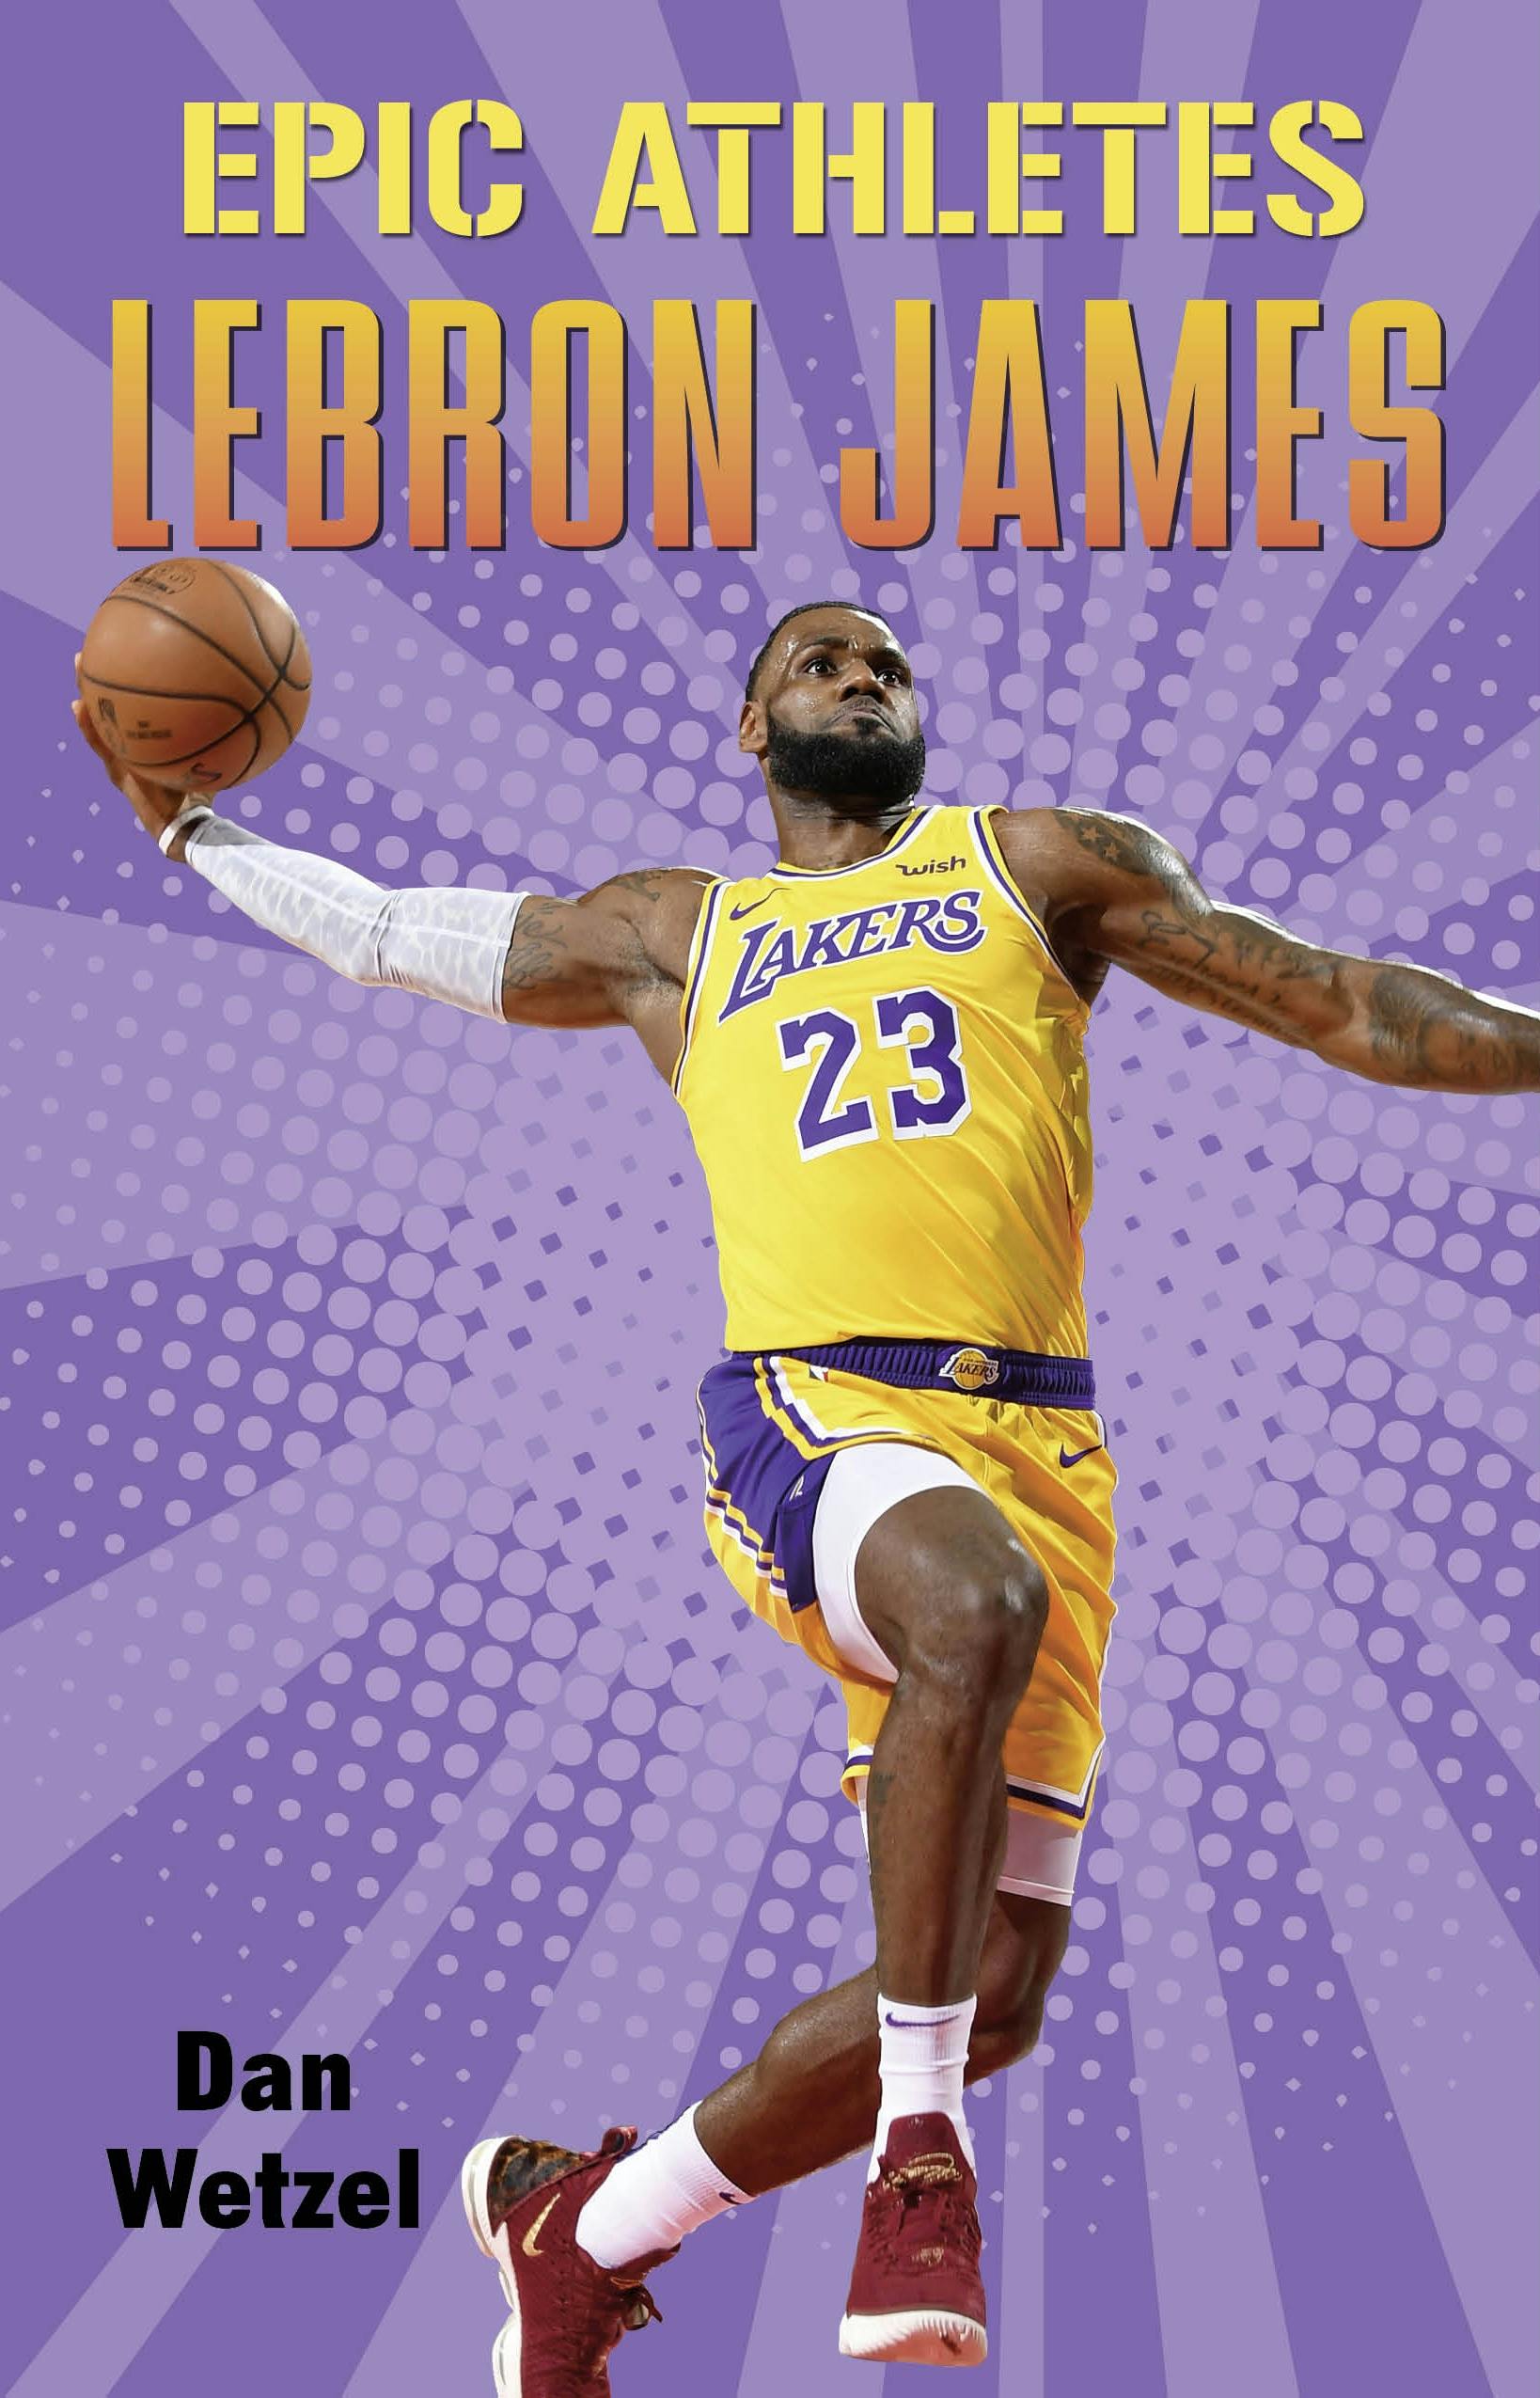 Lebron James 6 New Number Jerseys And New Seasons champions Poster for  Sale by Basketball For Life